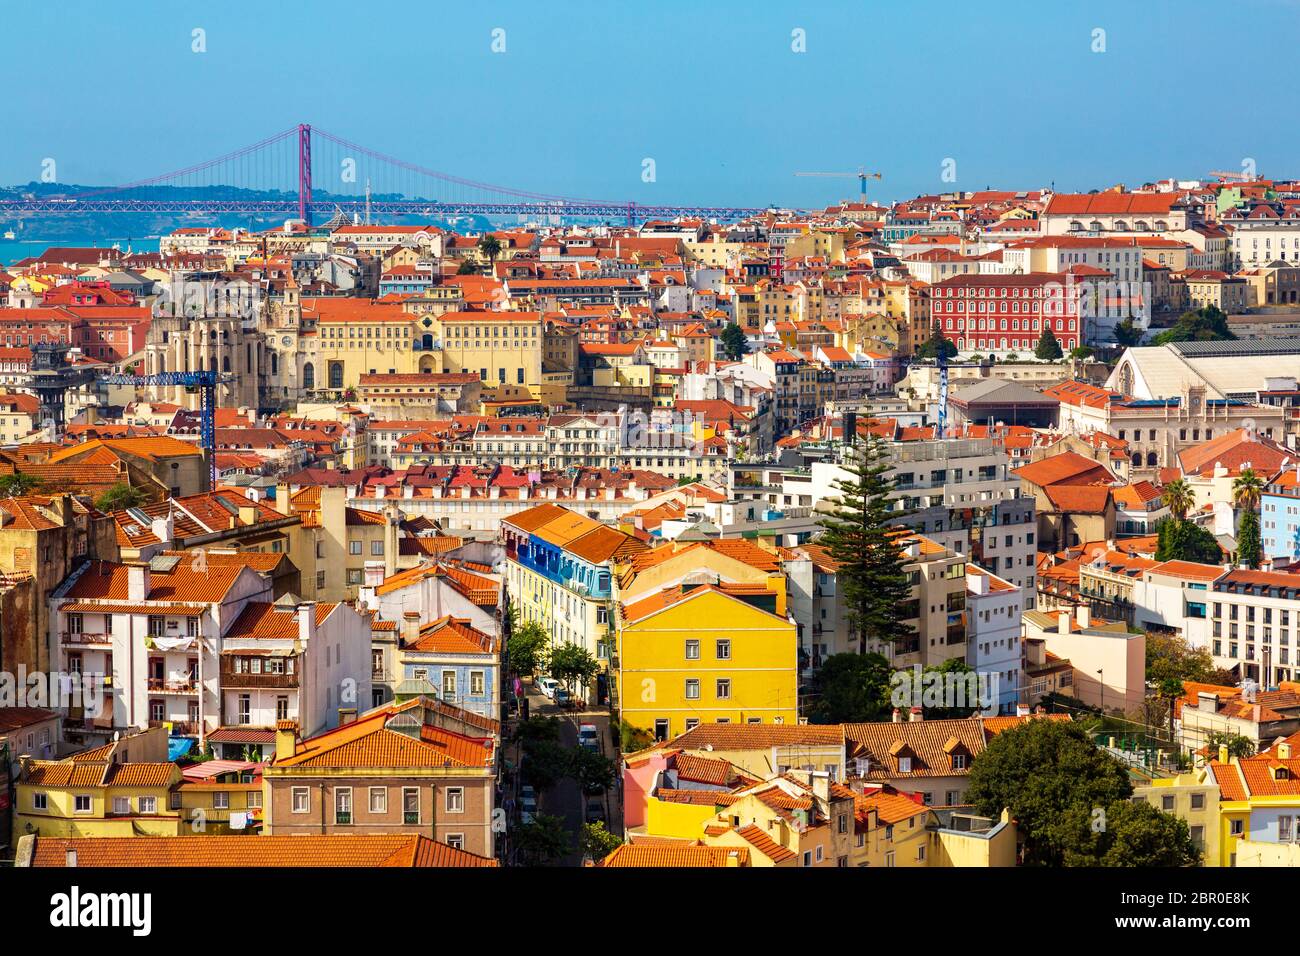 Panorama of Lisbon old town viewed from Miradouro da Graca observation point, Portugal Stock Photo